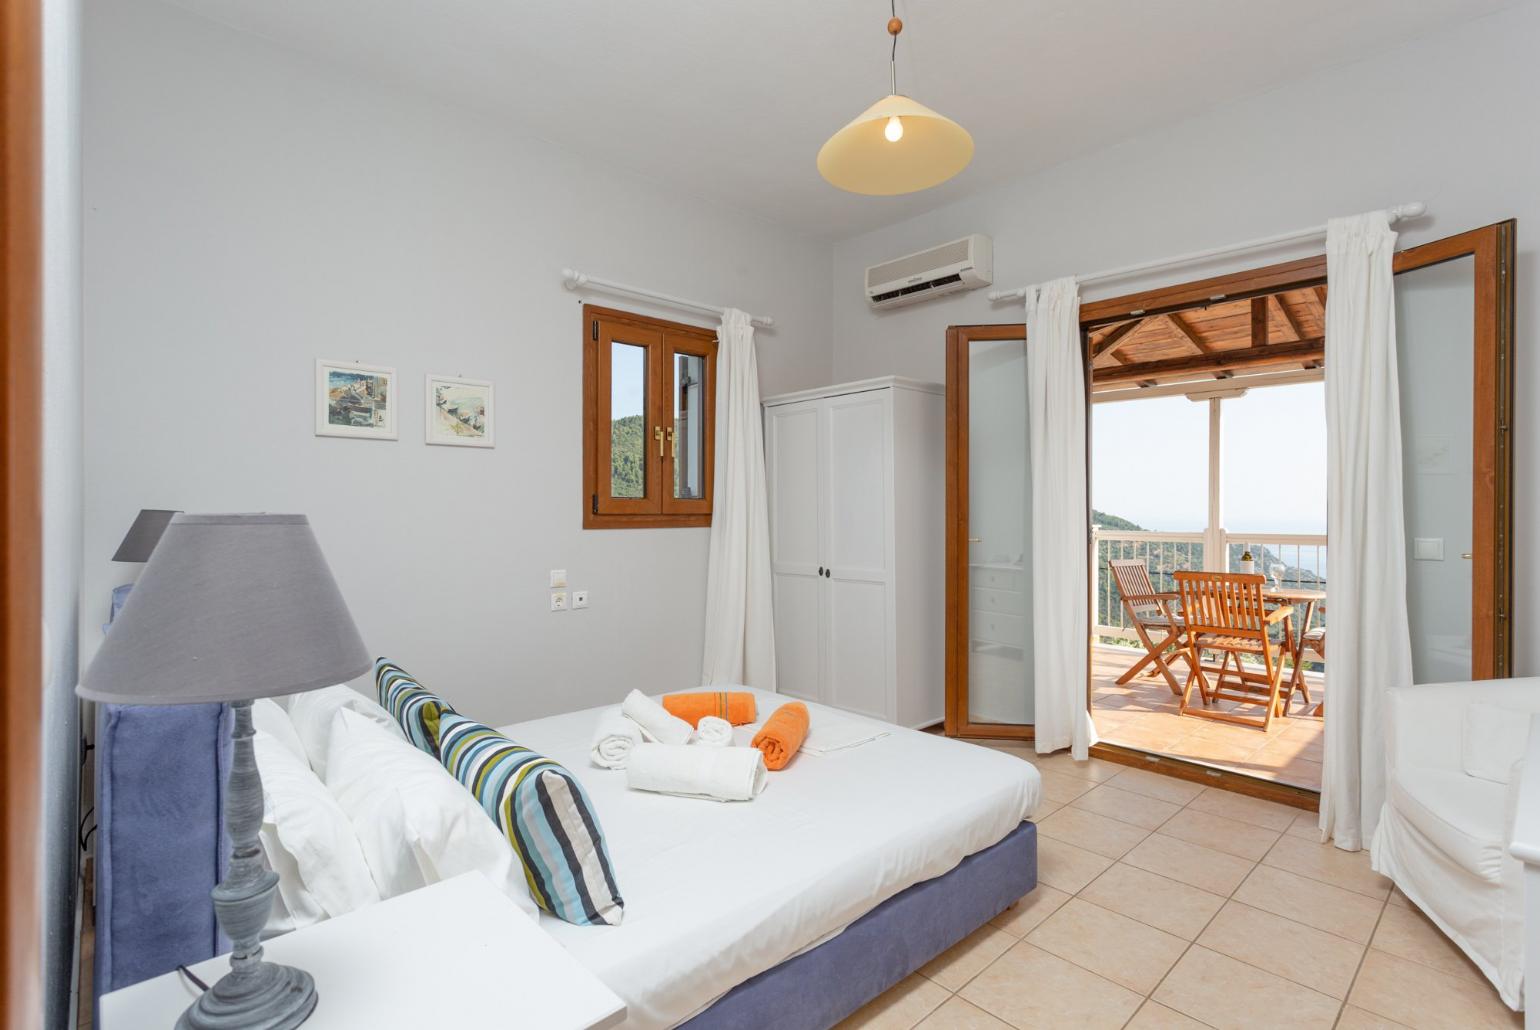 Double bedroom with A/C and balcony access with sea views